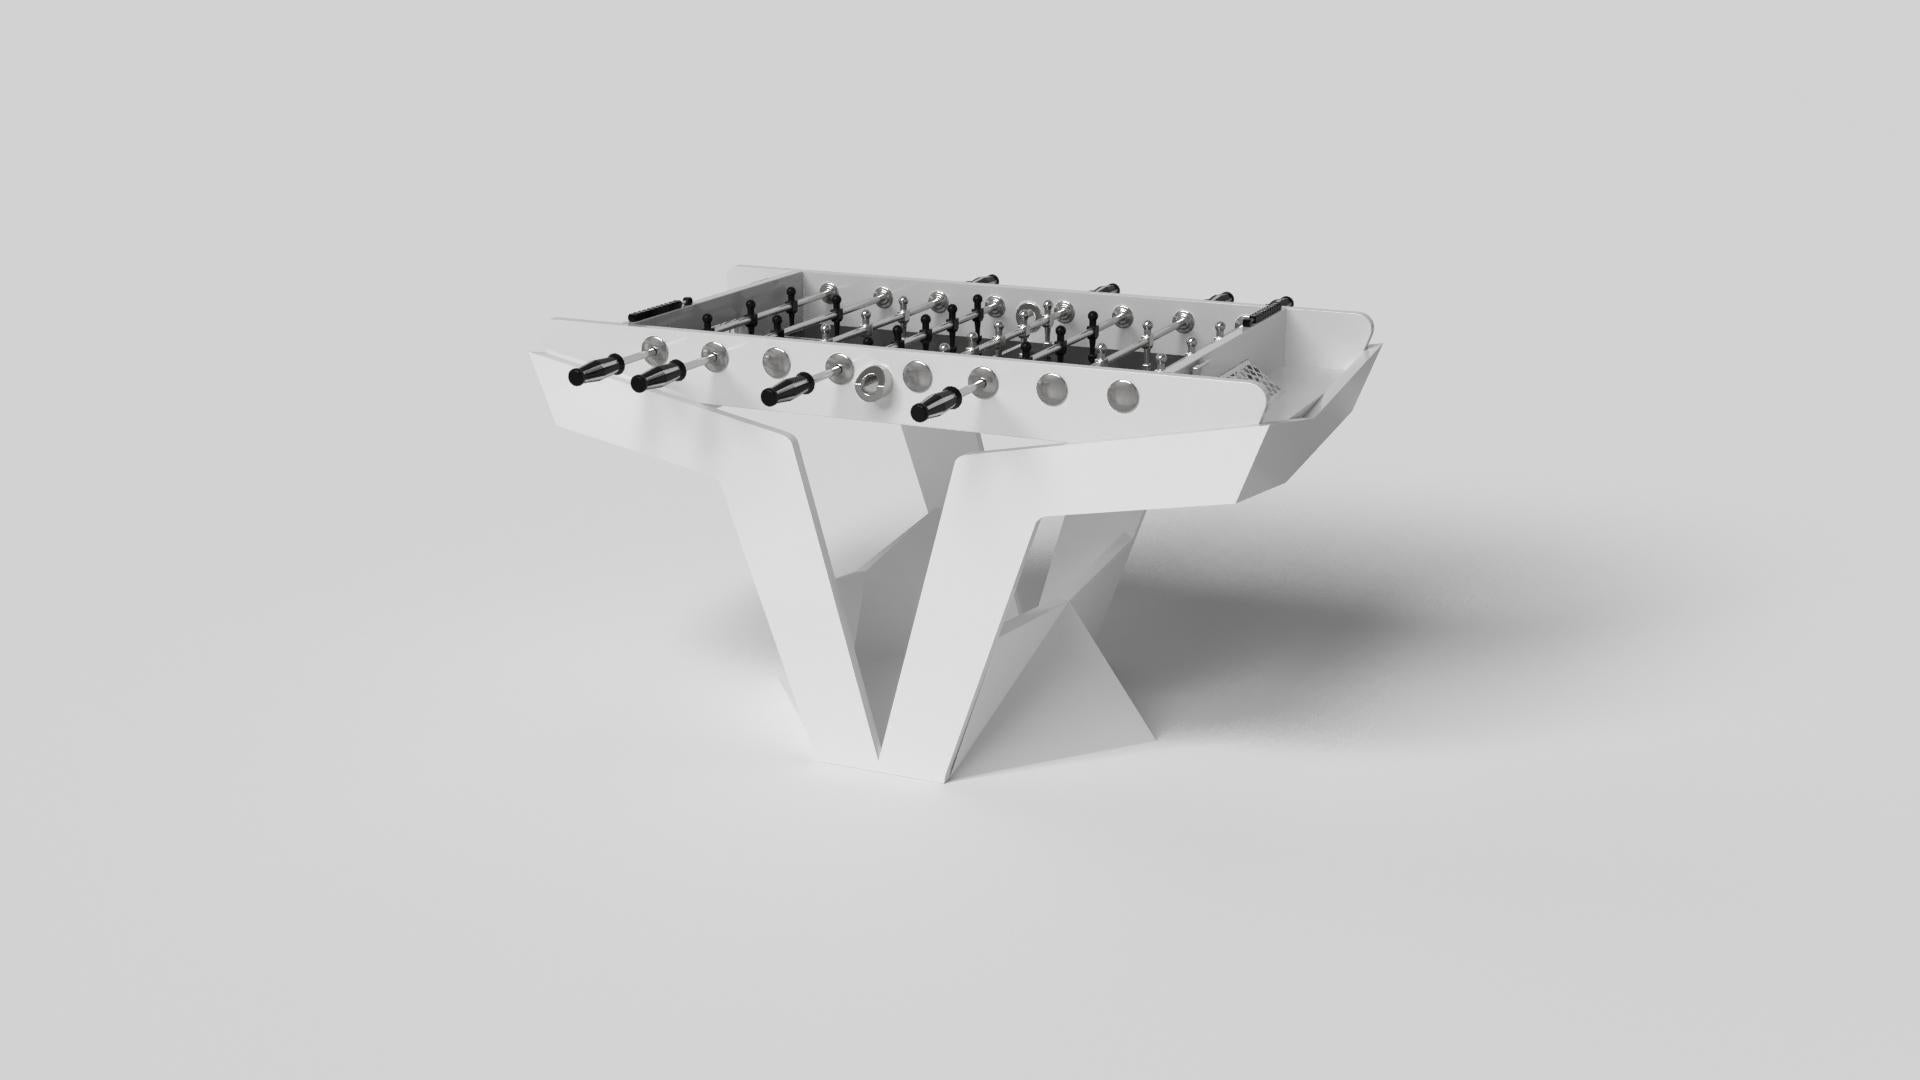 The Enzo foosball table is Inspired by the aerodynamic angles of top-of-the-line European vehicles. Designed with sleek, V-shaped lines and a thoughtful use of negative space, this table boasts an energetic sense of spirit while epitomizing the look